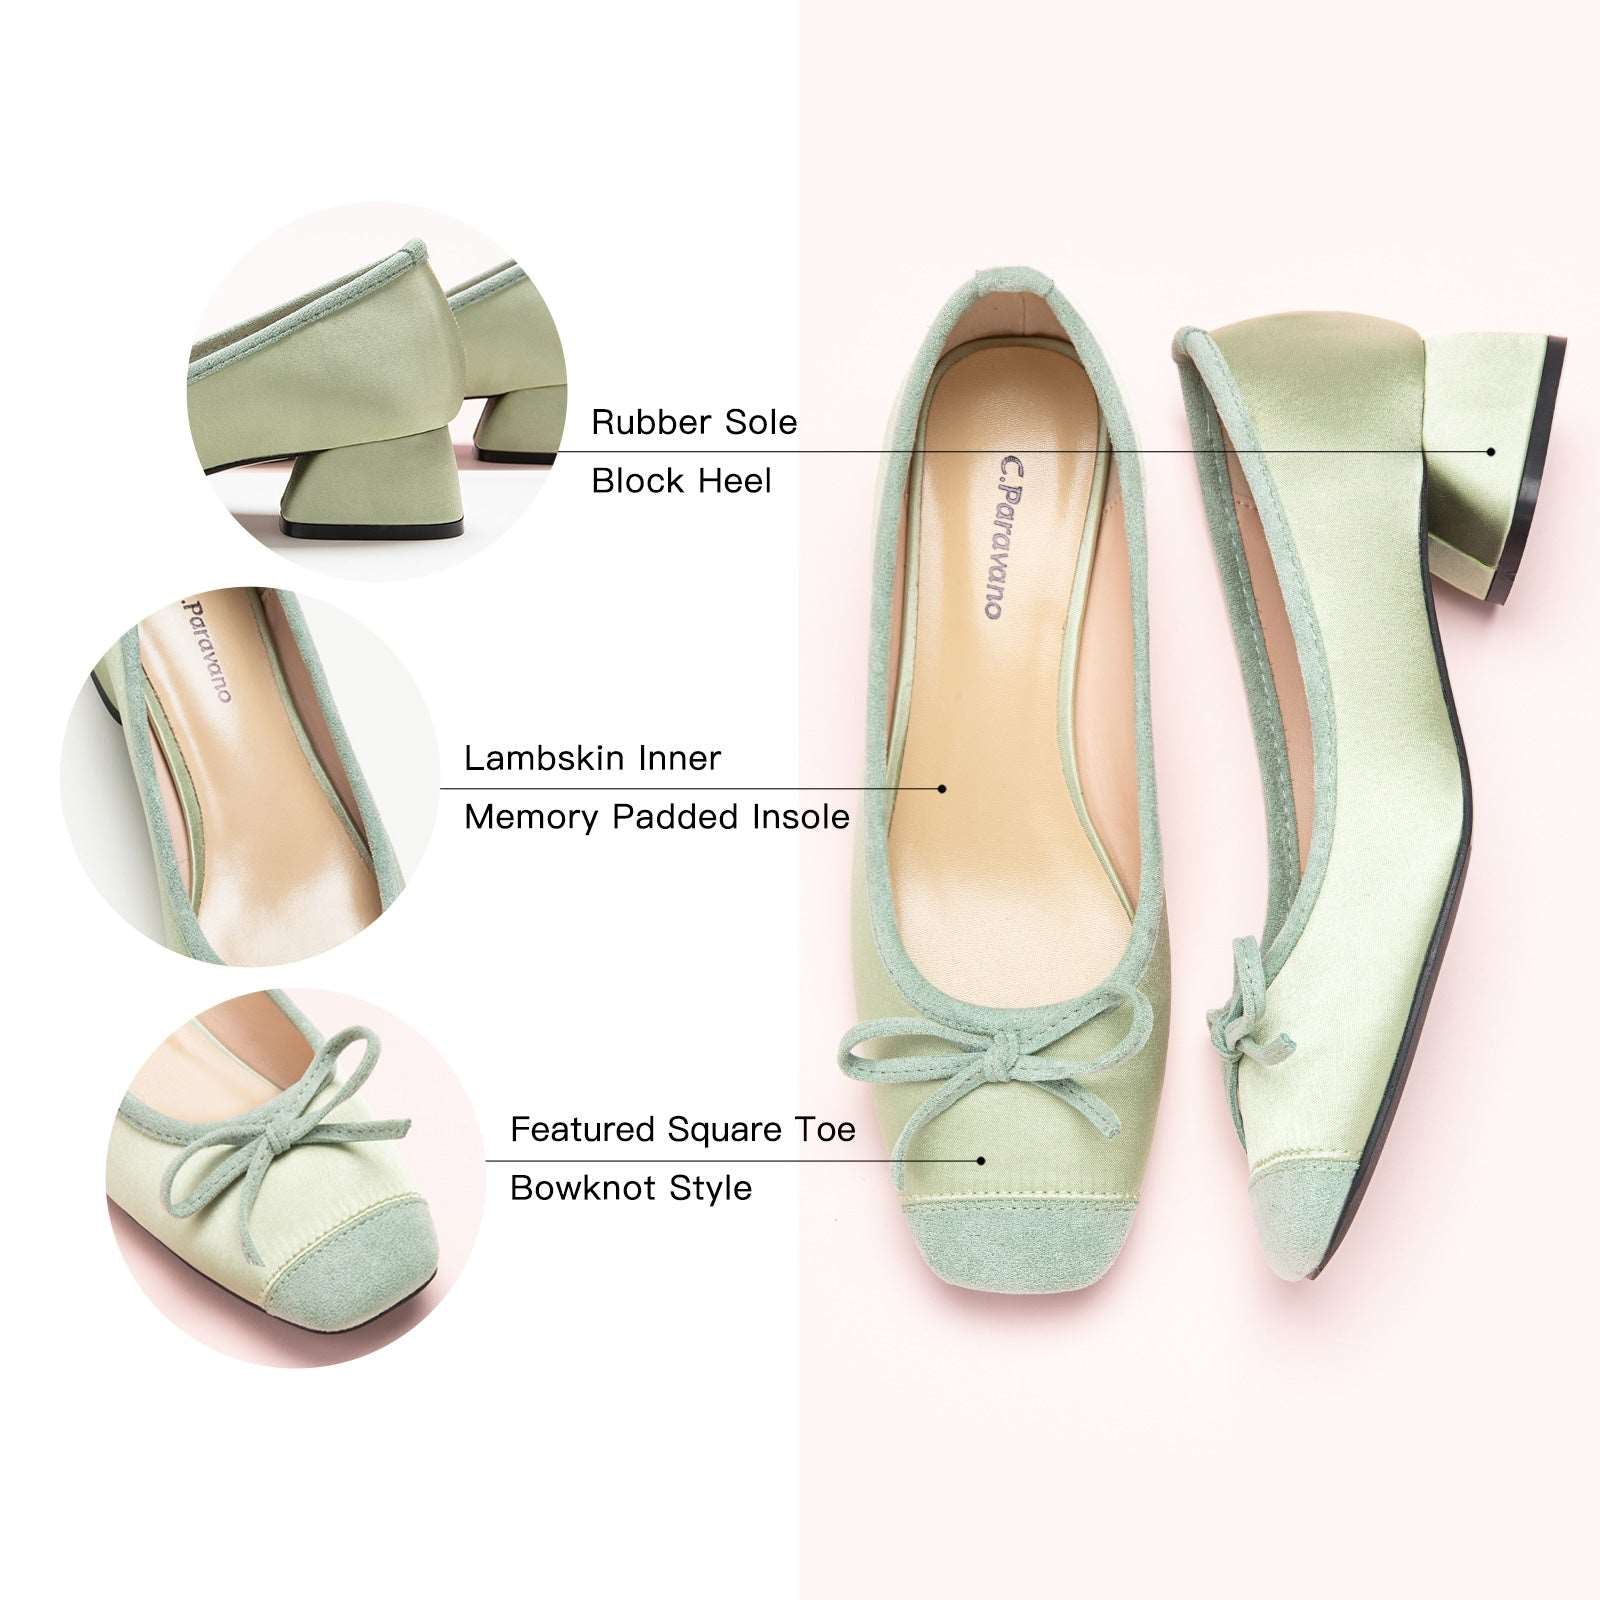 levate your style with these green bowknot low heels, offering playful elegance and a refreshing fashion statement